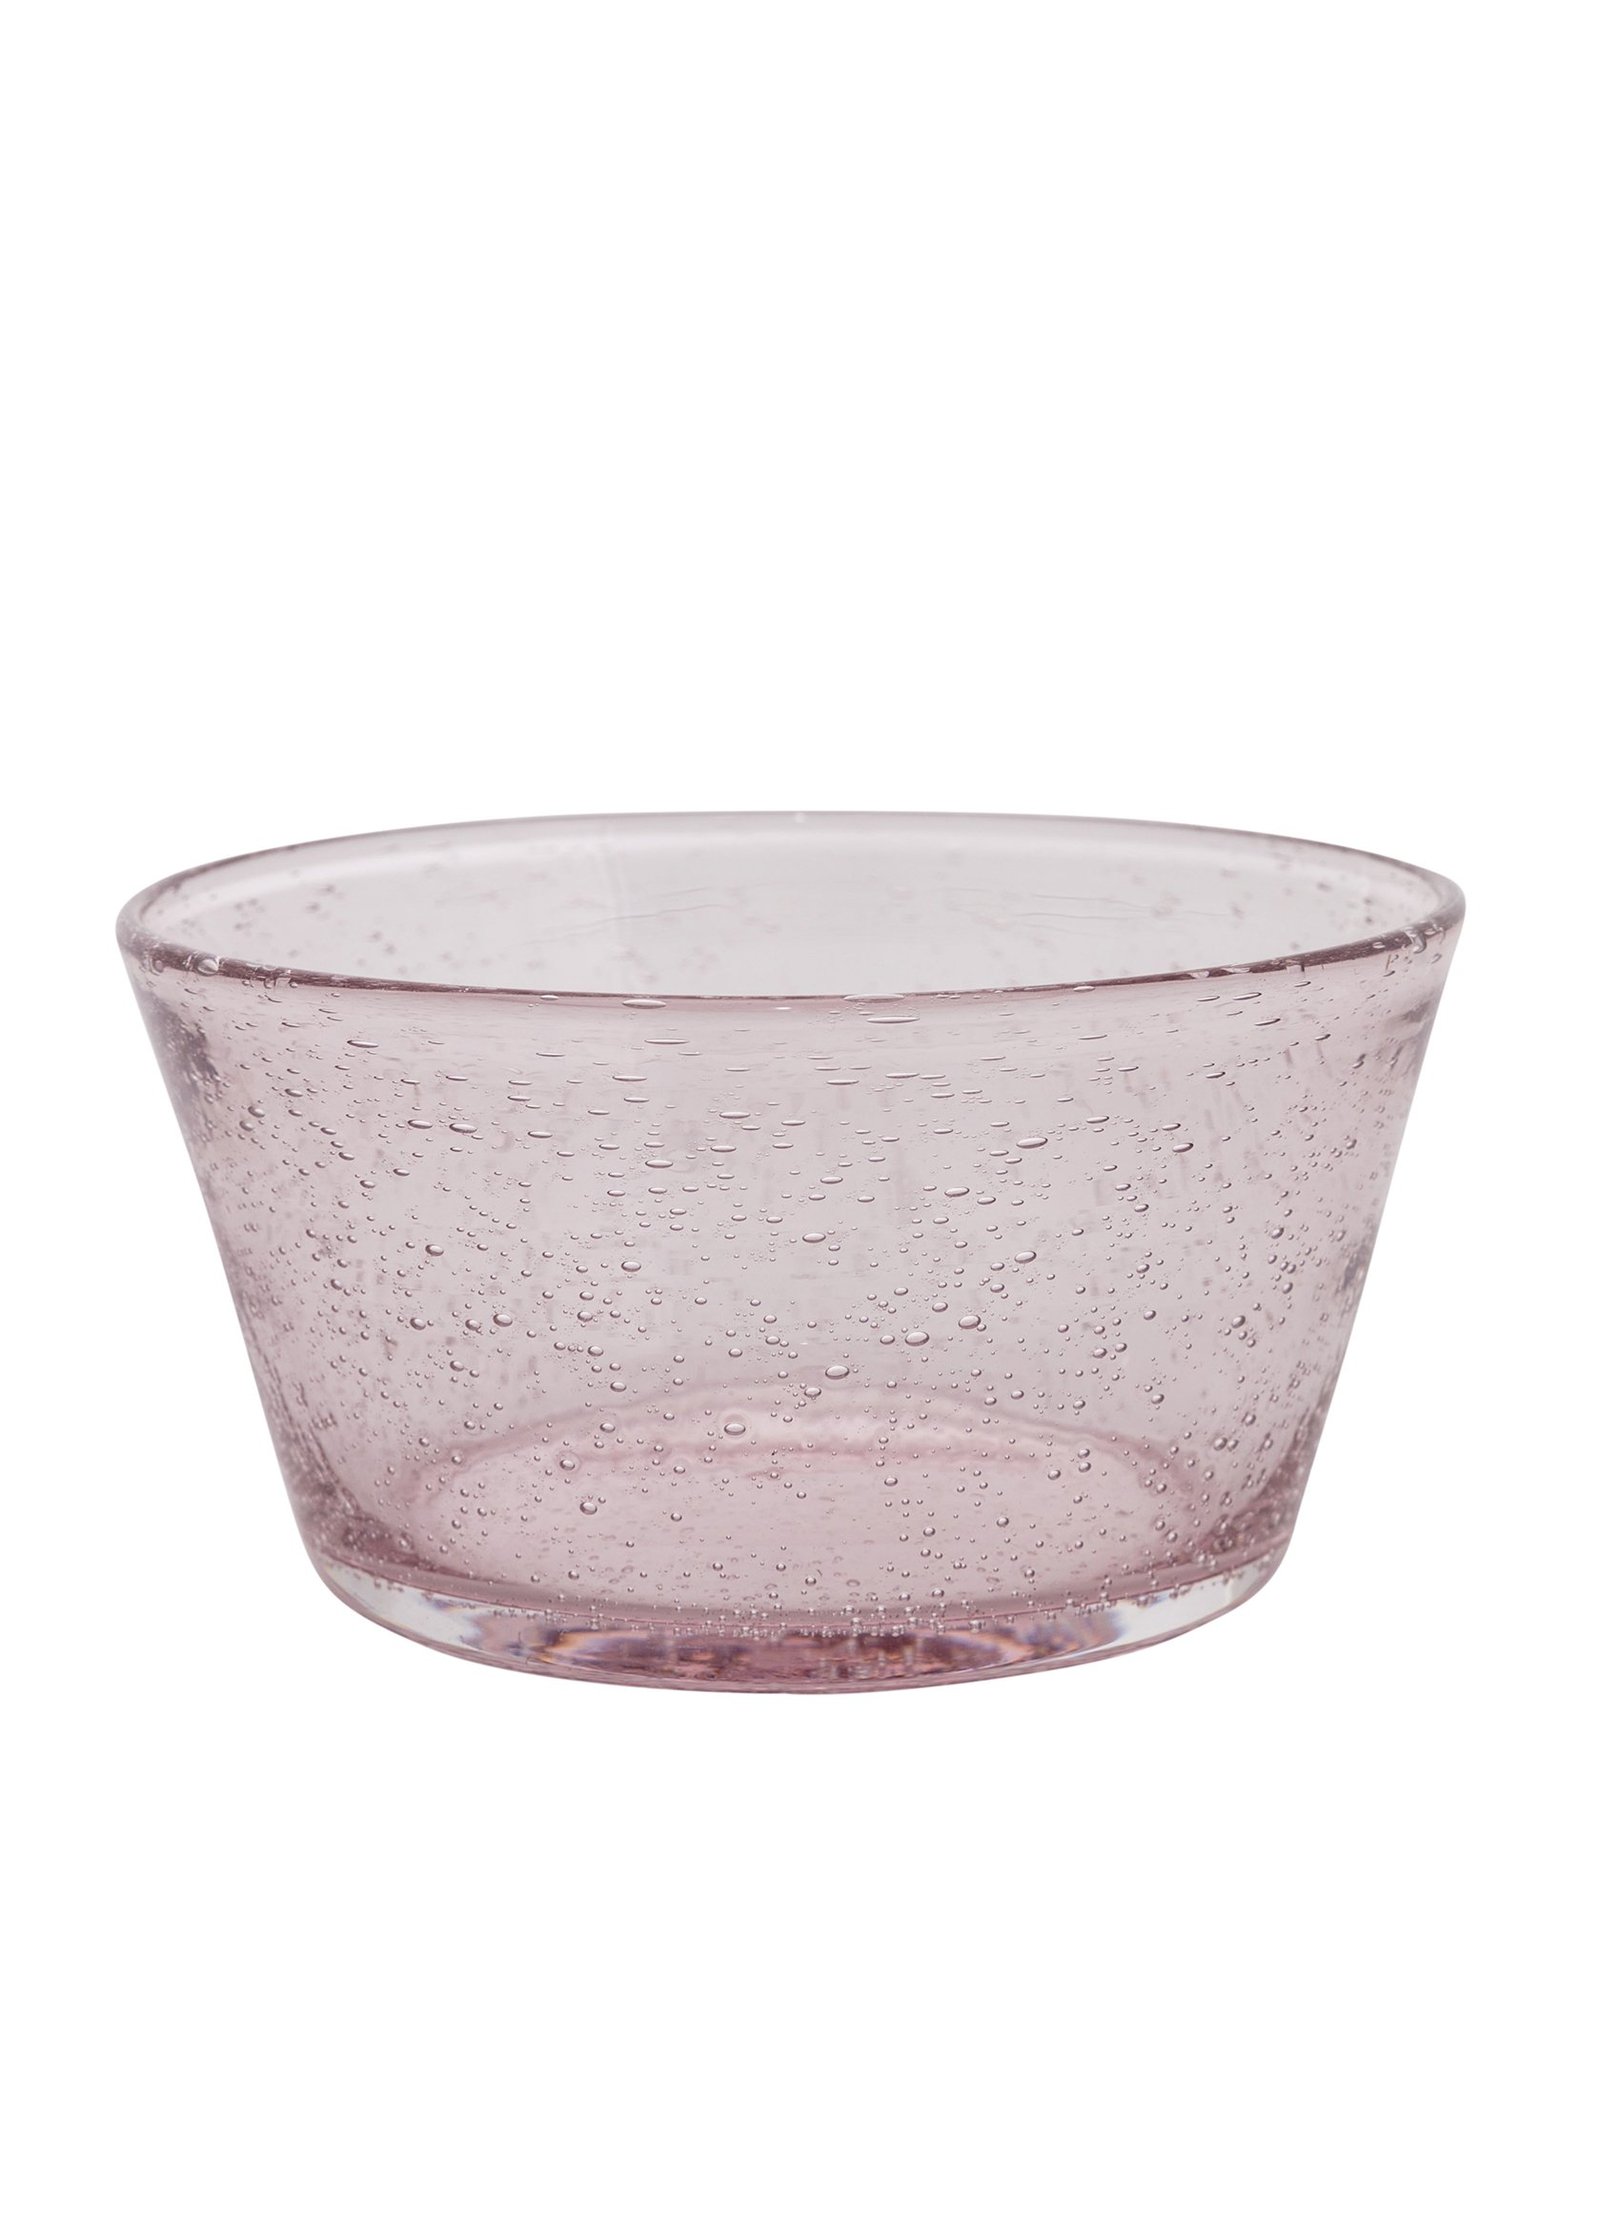 Glass bowl with bubbles Image 0